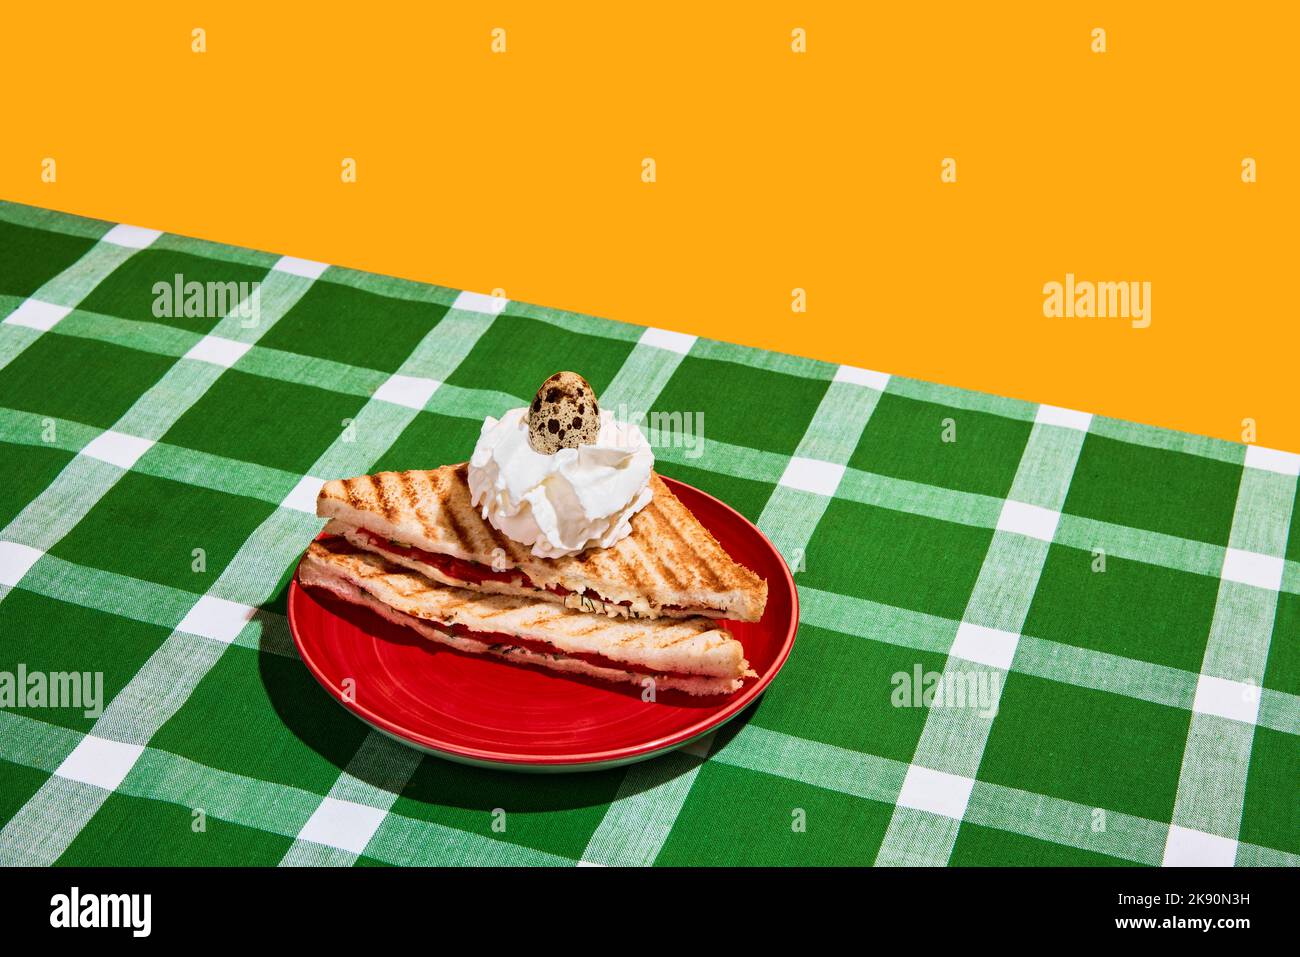 Surreal cake. Perfectionism and colorful minimalism. Meat sandwich, fried toast and raw quail egg on plaid tablecloth background. Food pop art Stock Photo